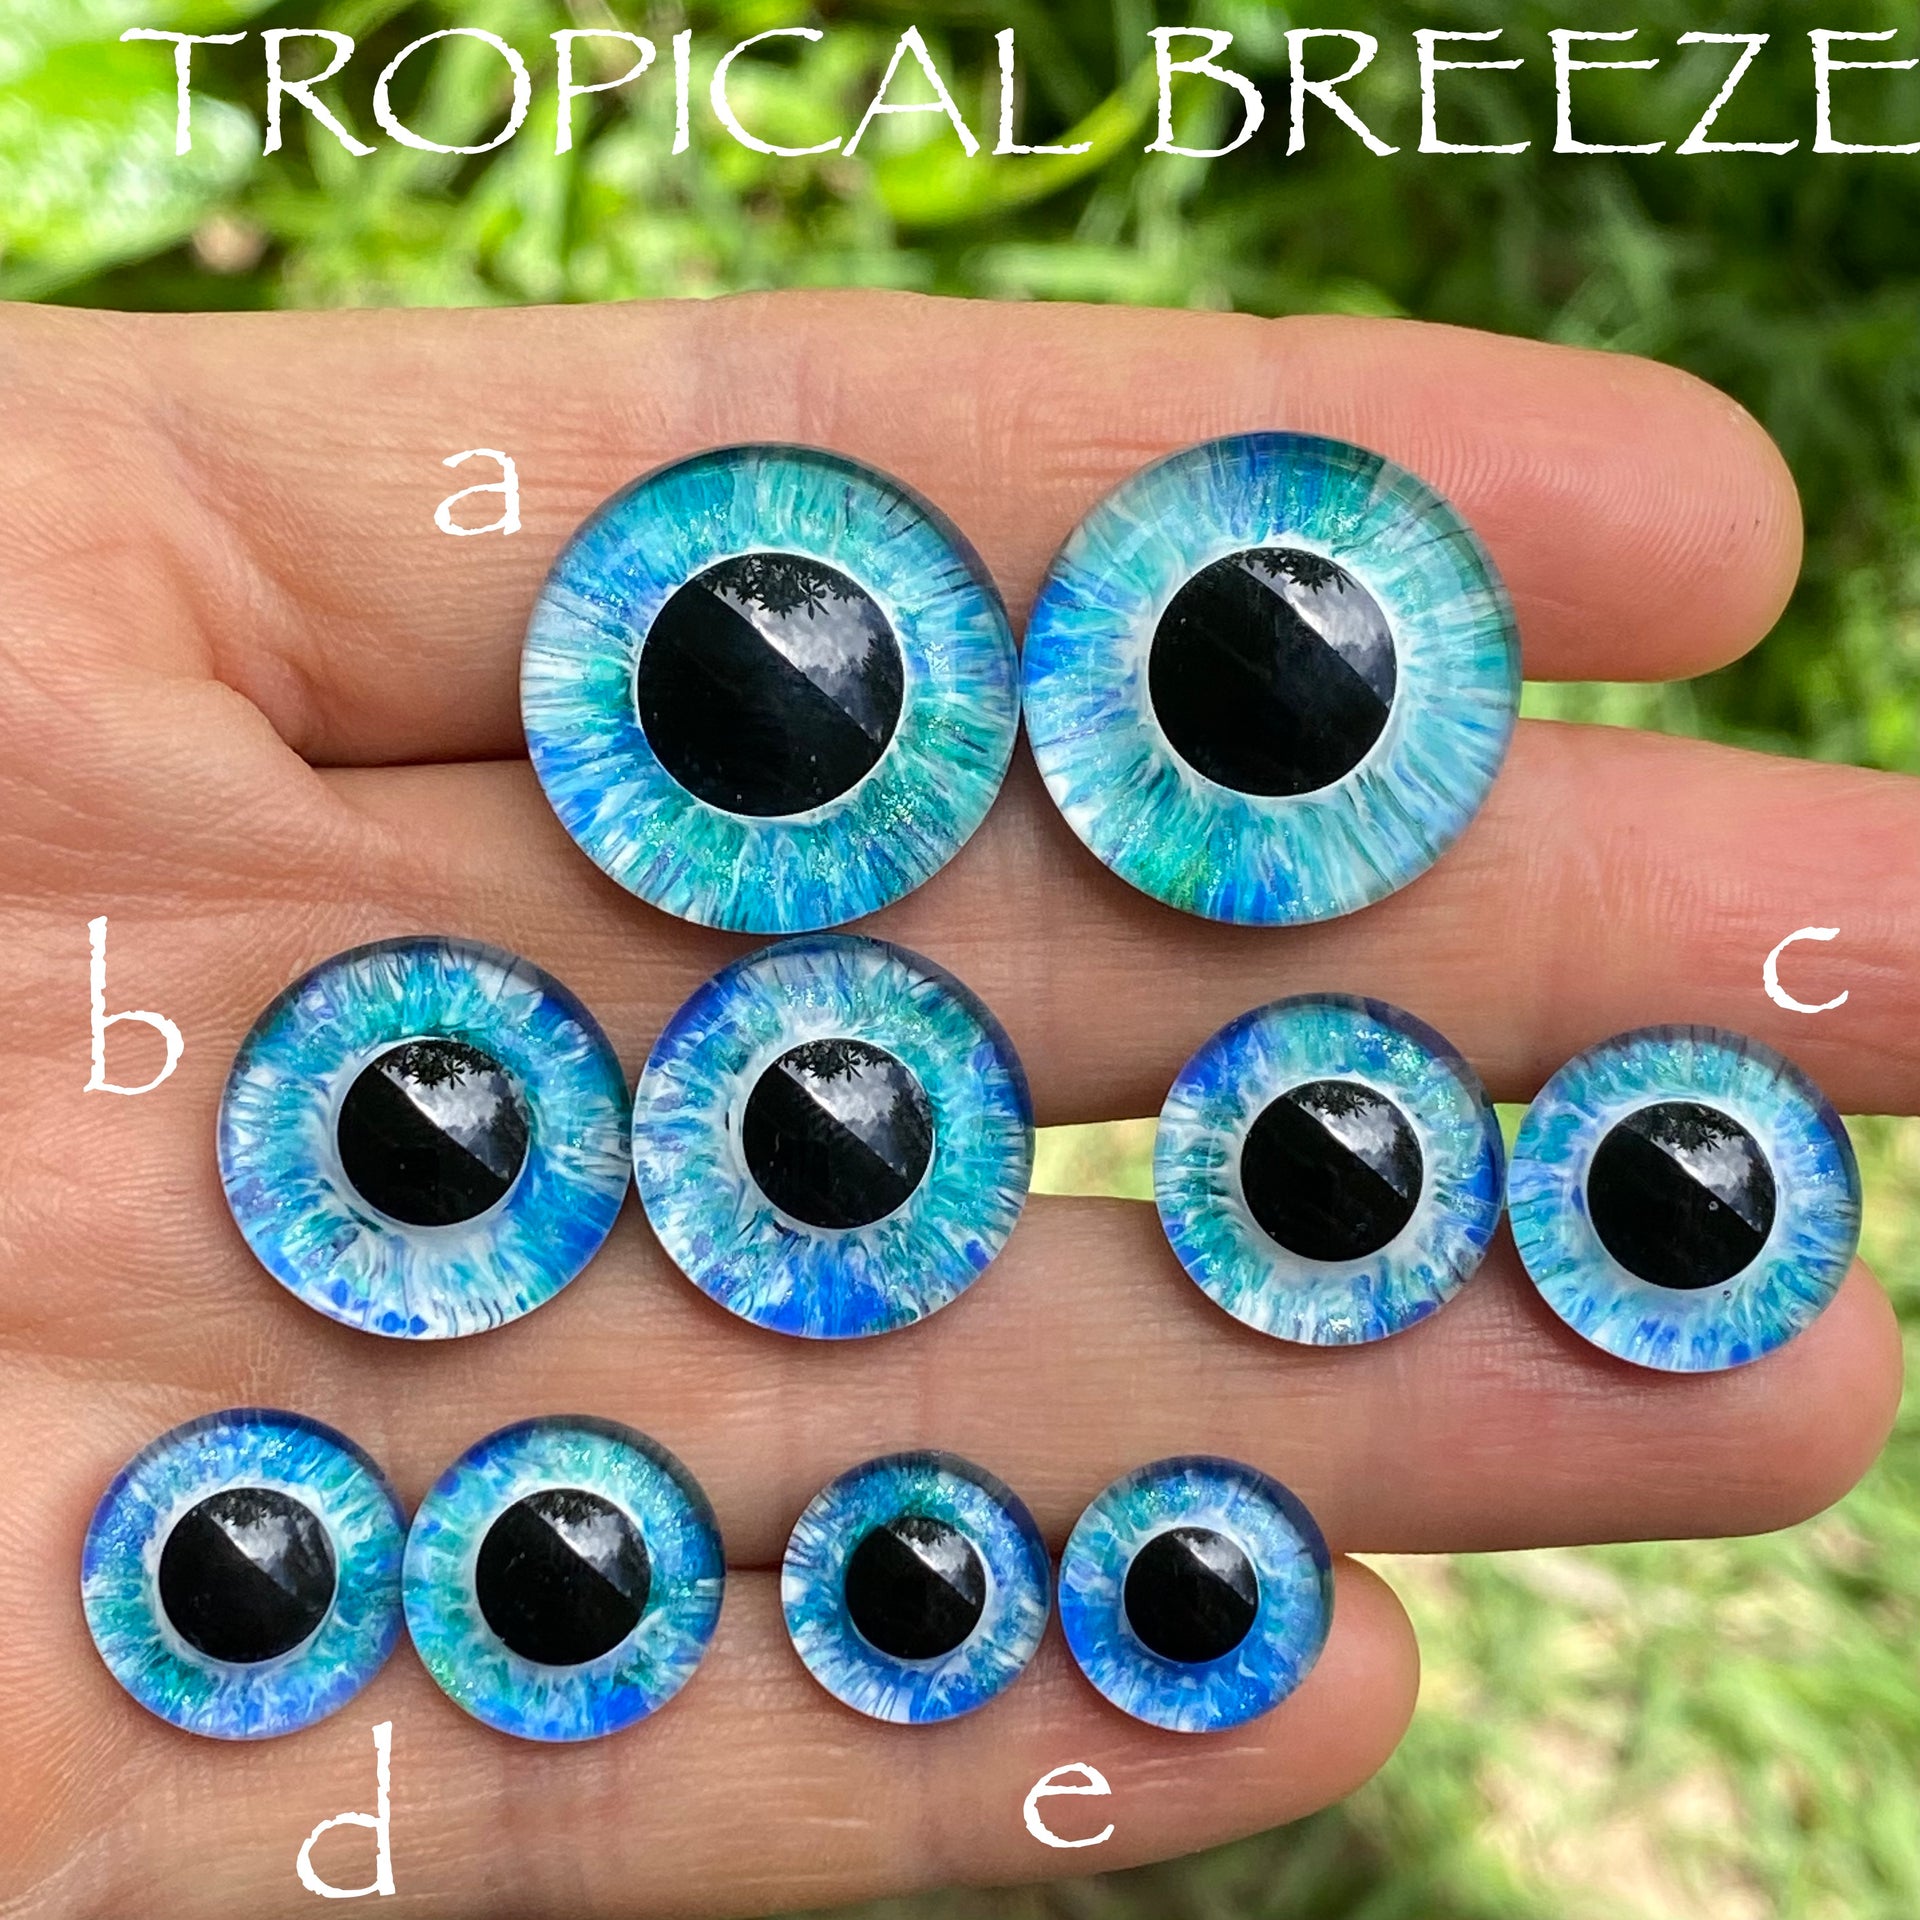 Hand Painted Eyes - Tropical Breeze